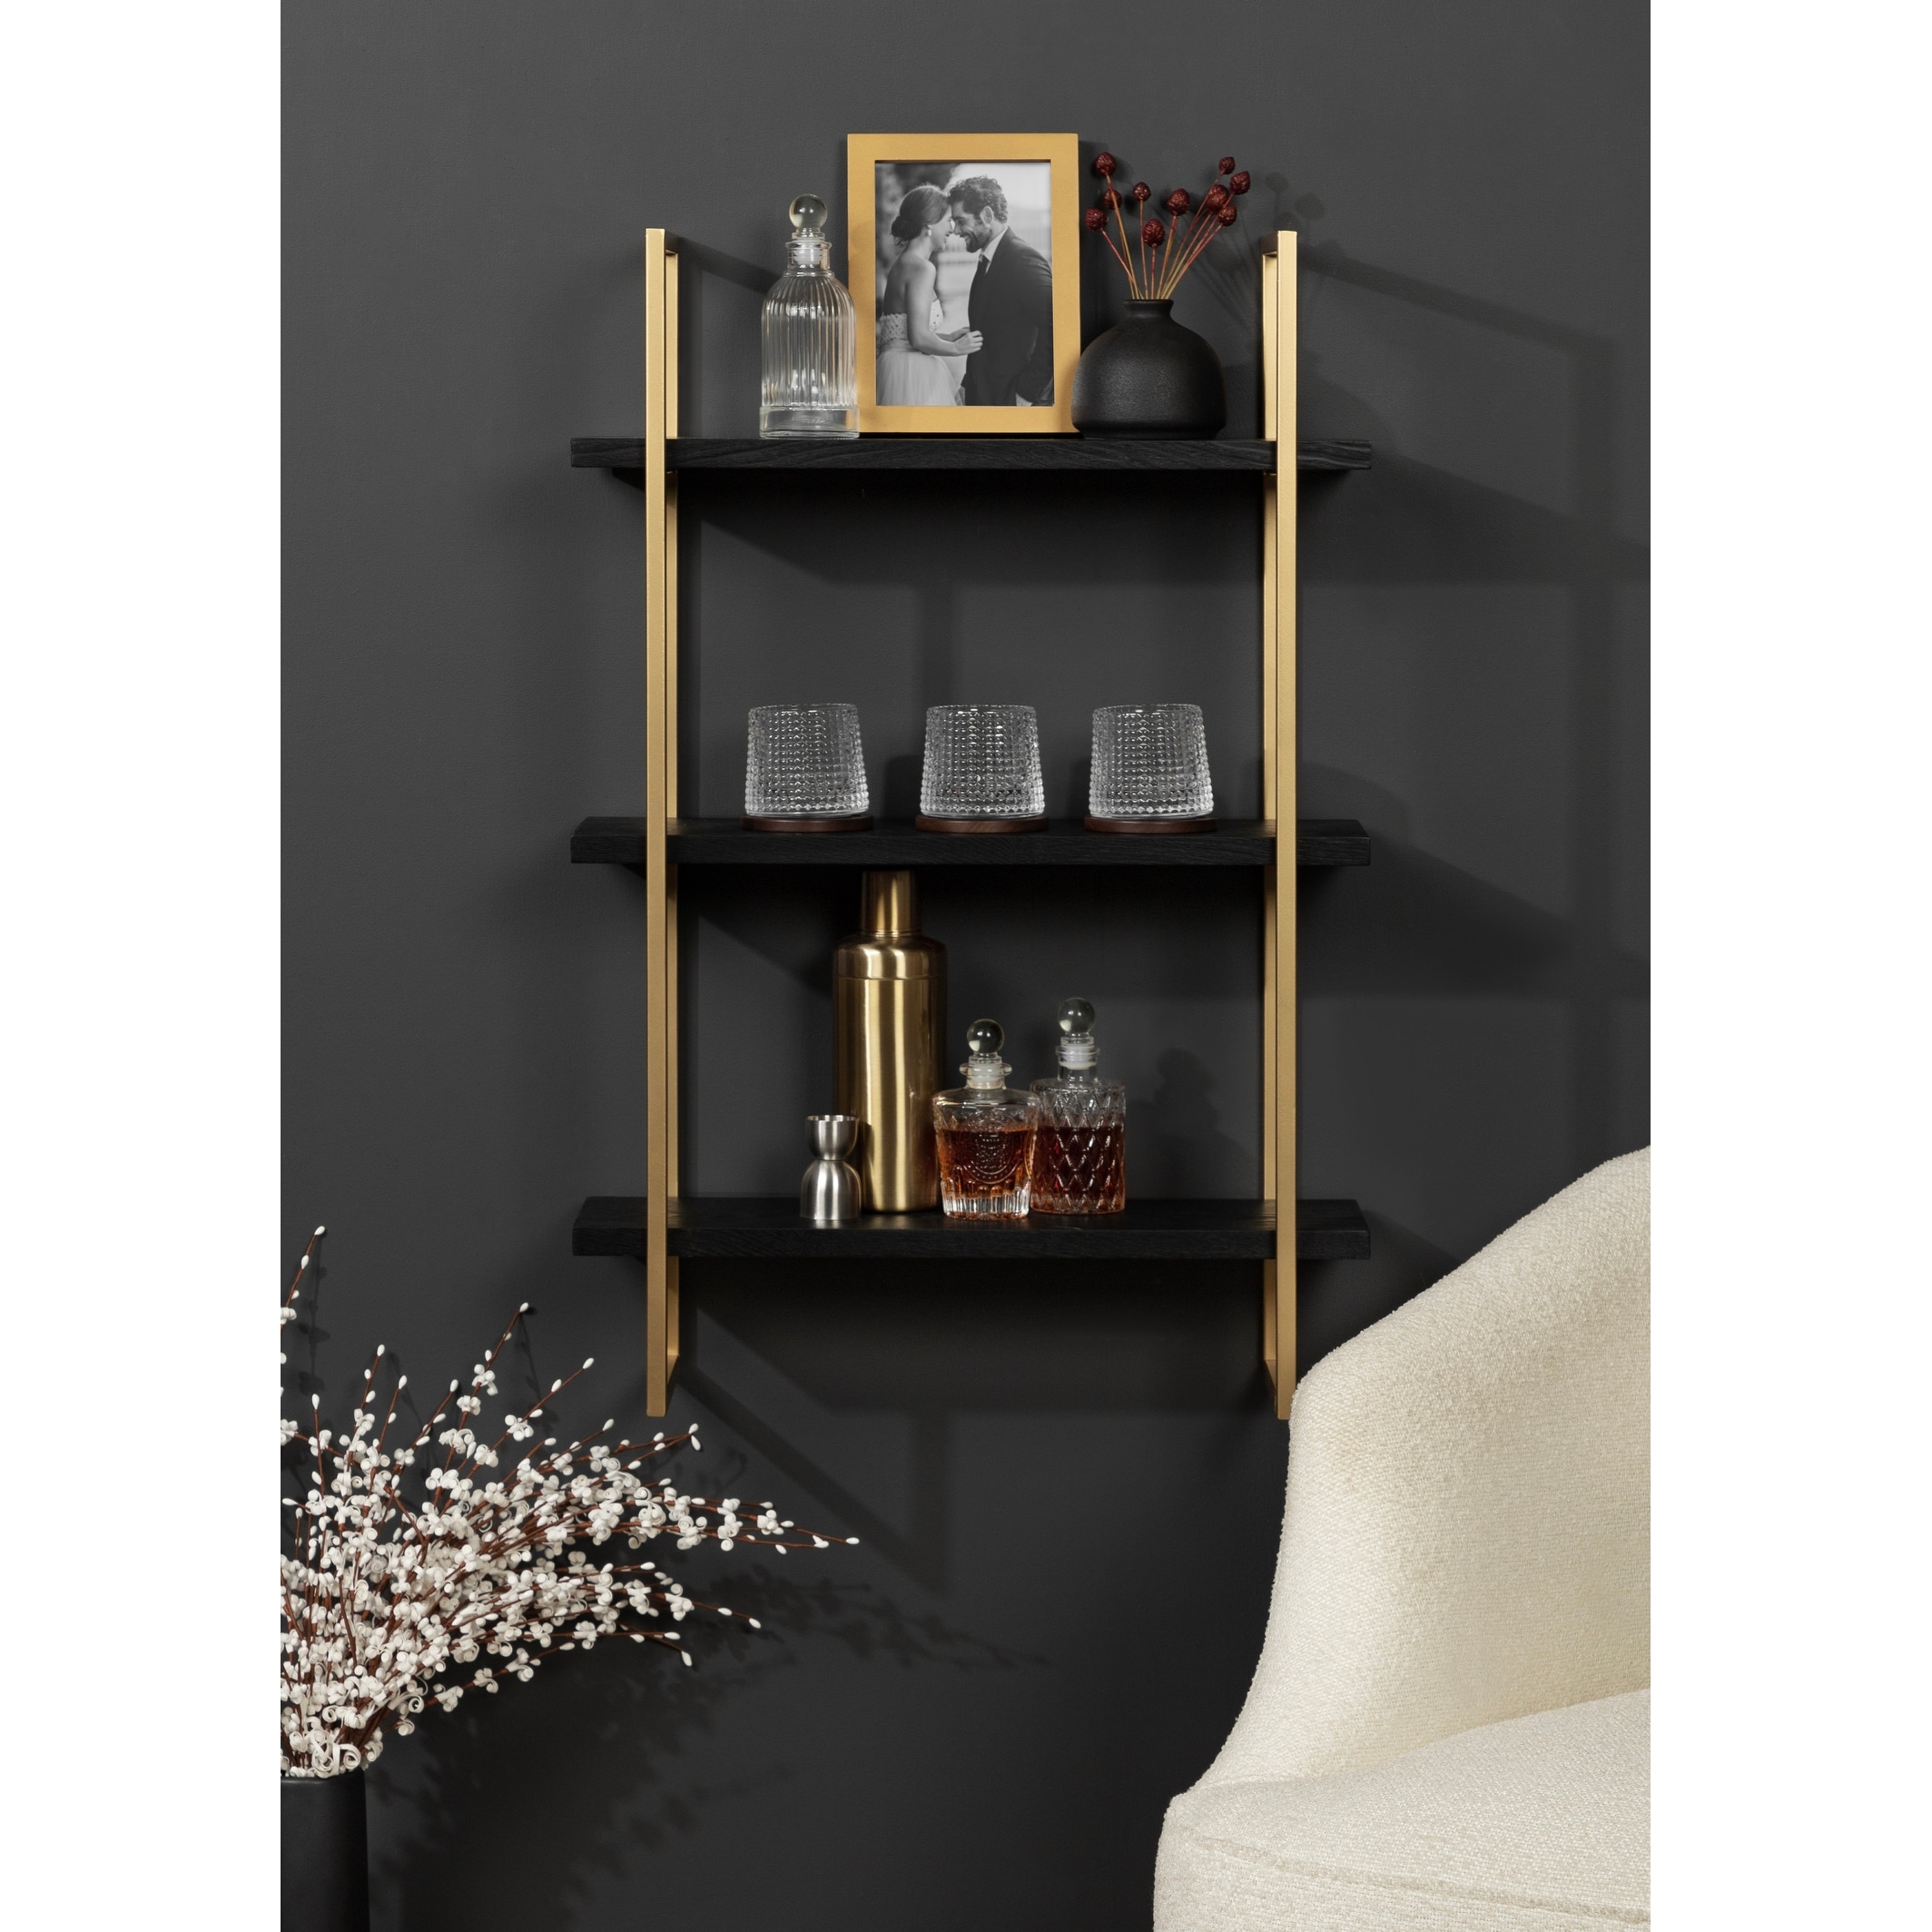 https://ak1.ostkcdn.com/images/products/is/images/direct/16fb941ca8cae2c9e43b0d17ea2685ee7d217369/Kate-and-Laurel-Leigh-Wood-and-Metal-Wall-Shelf.jpg